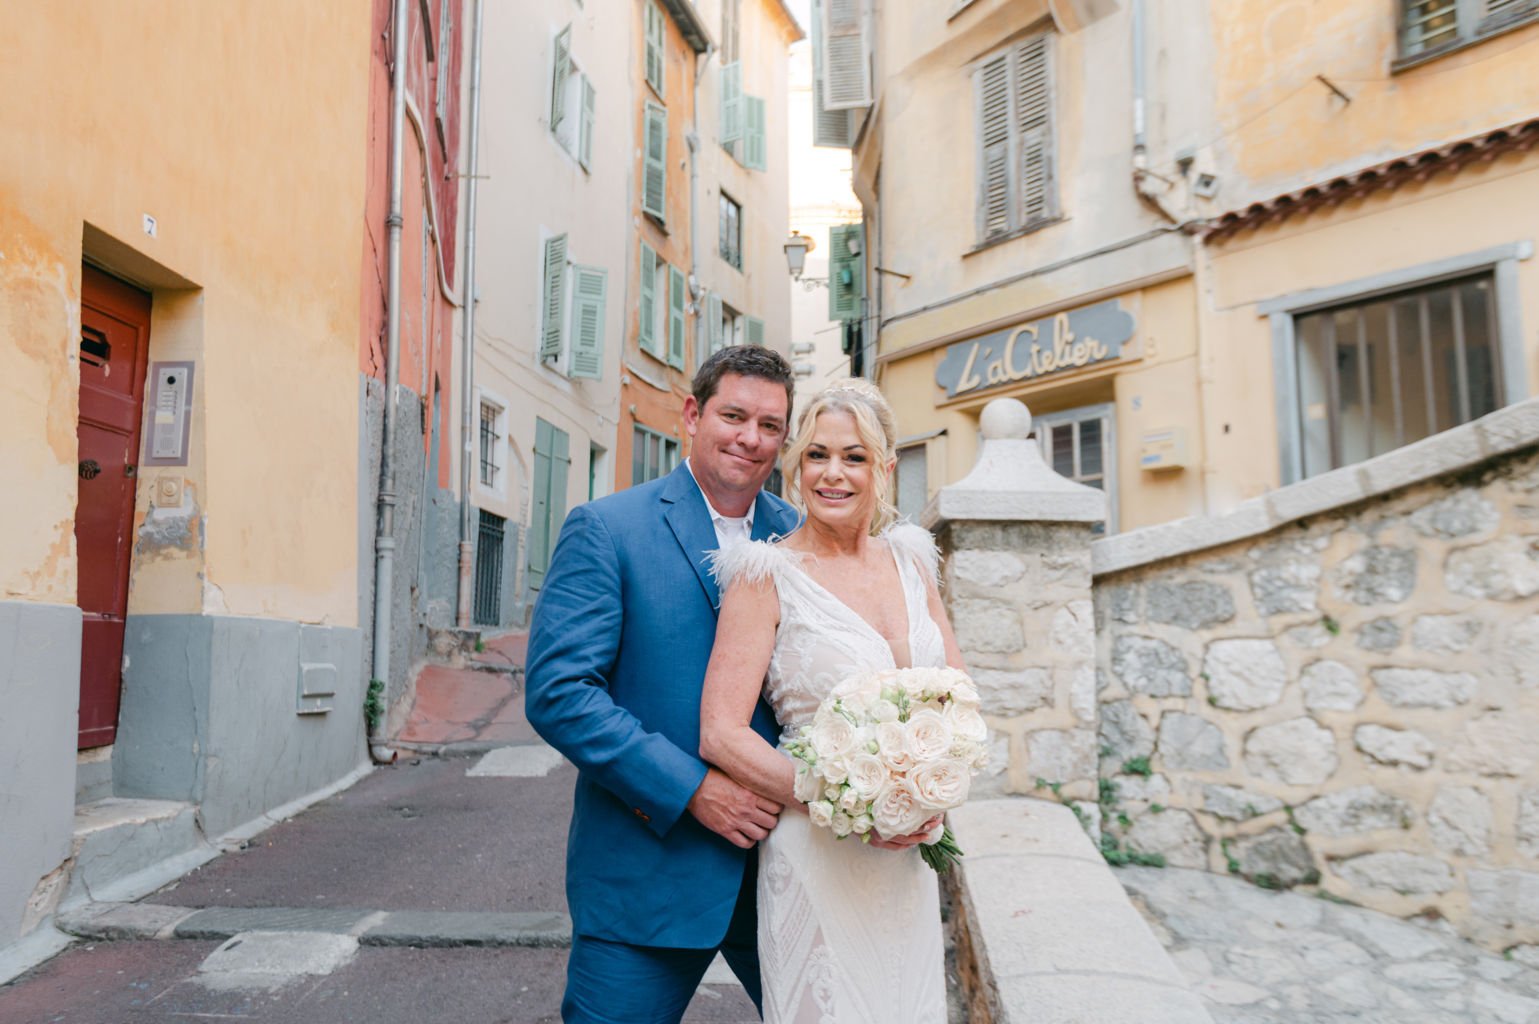 wedding photographer Nice, France Cote d'Azur photo session bride and groom Nice old town sedinta foto nunta Nisa Franta fotograf nunta Franta